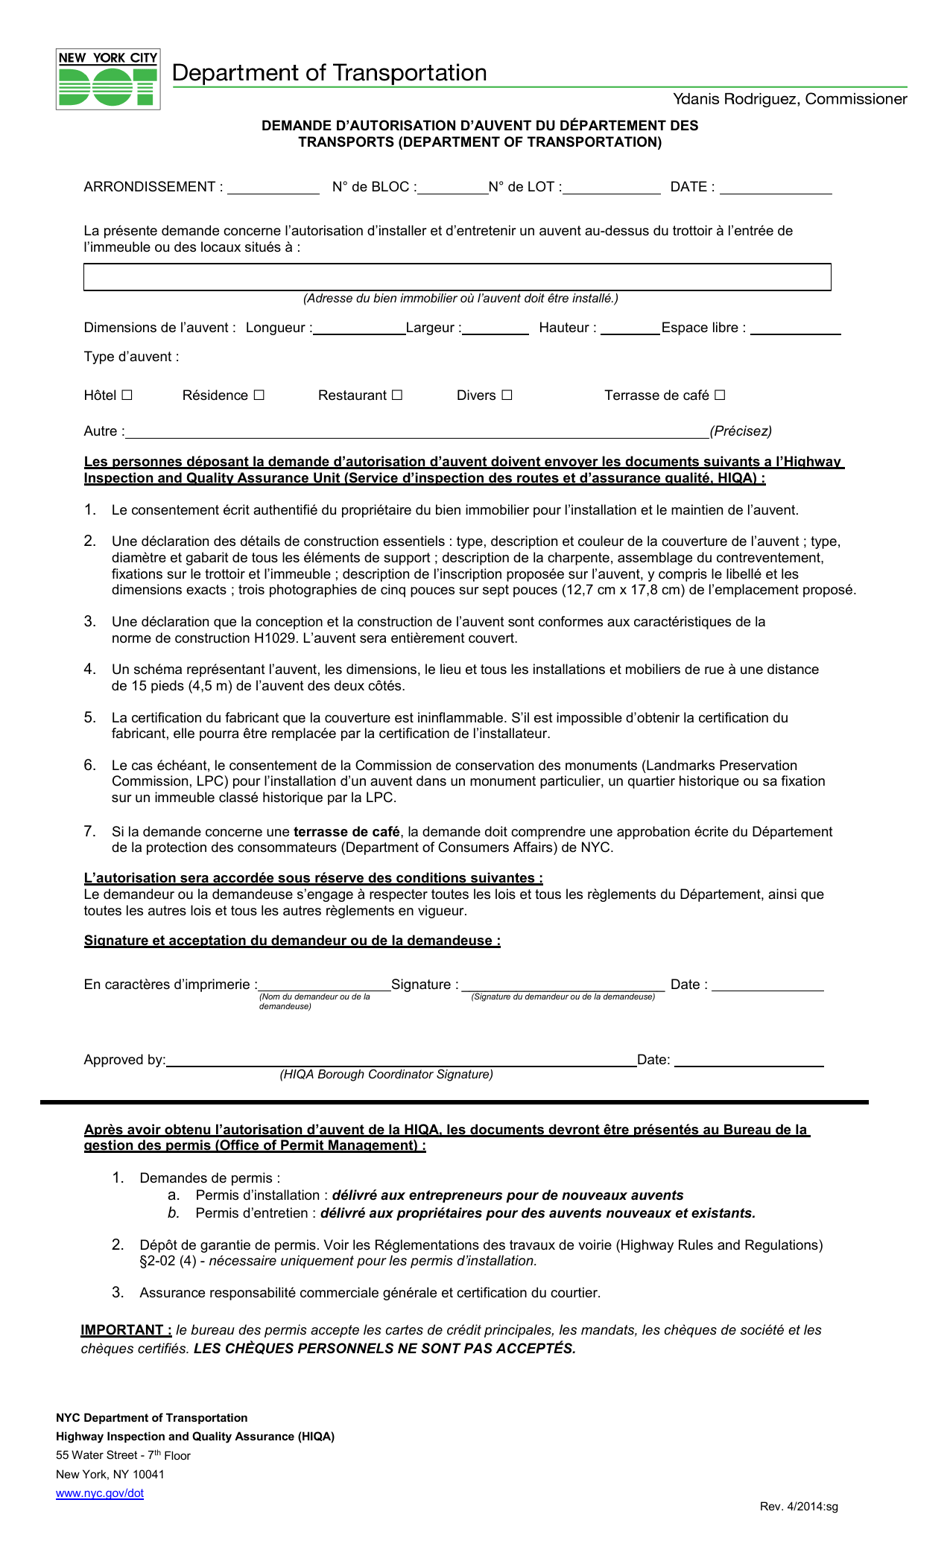 Canopy Authorization Application - New York City (French), Page 1